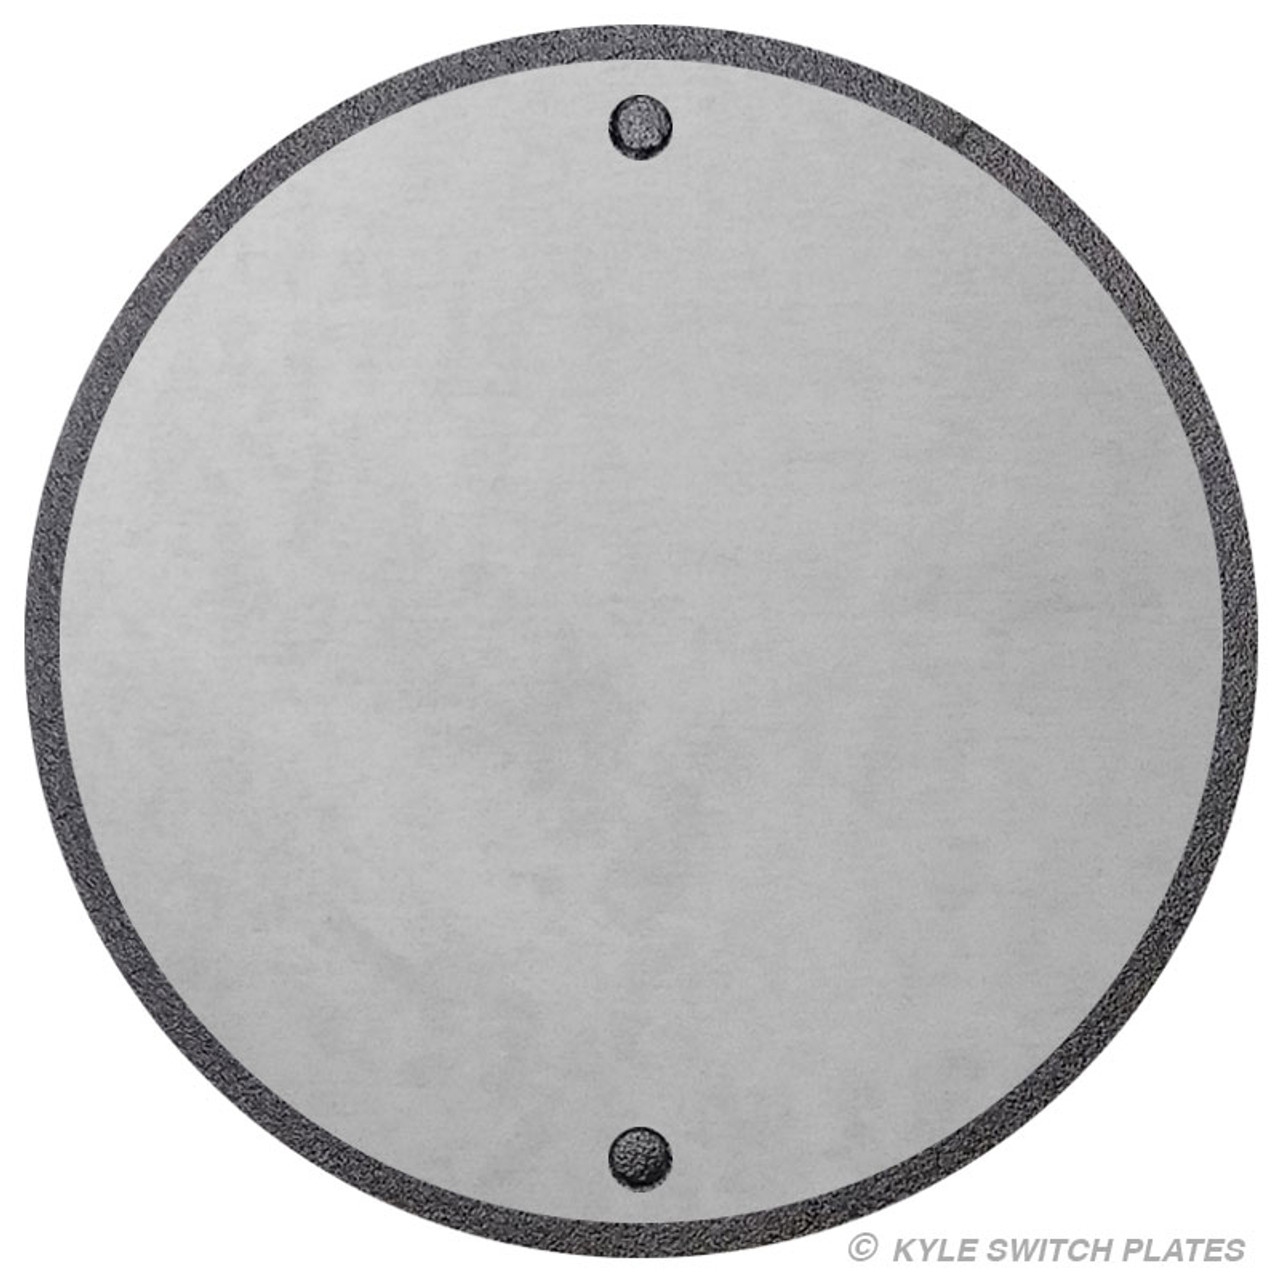 https://cdn11.bigcommerce.com/s-wlejmk/images/stencil/1280x1280/products/5642/21216/outdoor-4-inch-round-blank-wall-plate-cover-aluminum-spbc4gt-a__78522.1514943629.jpg?c=2